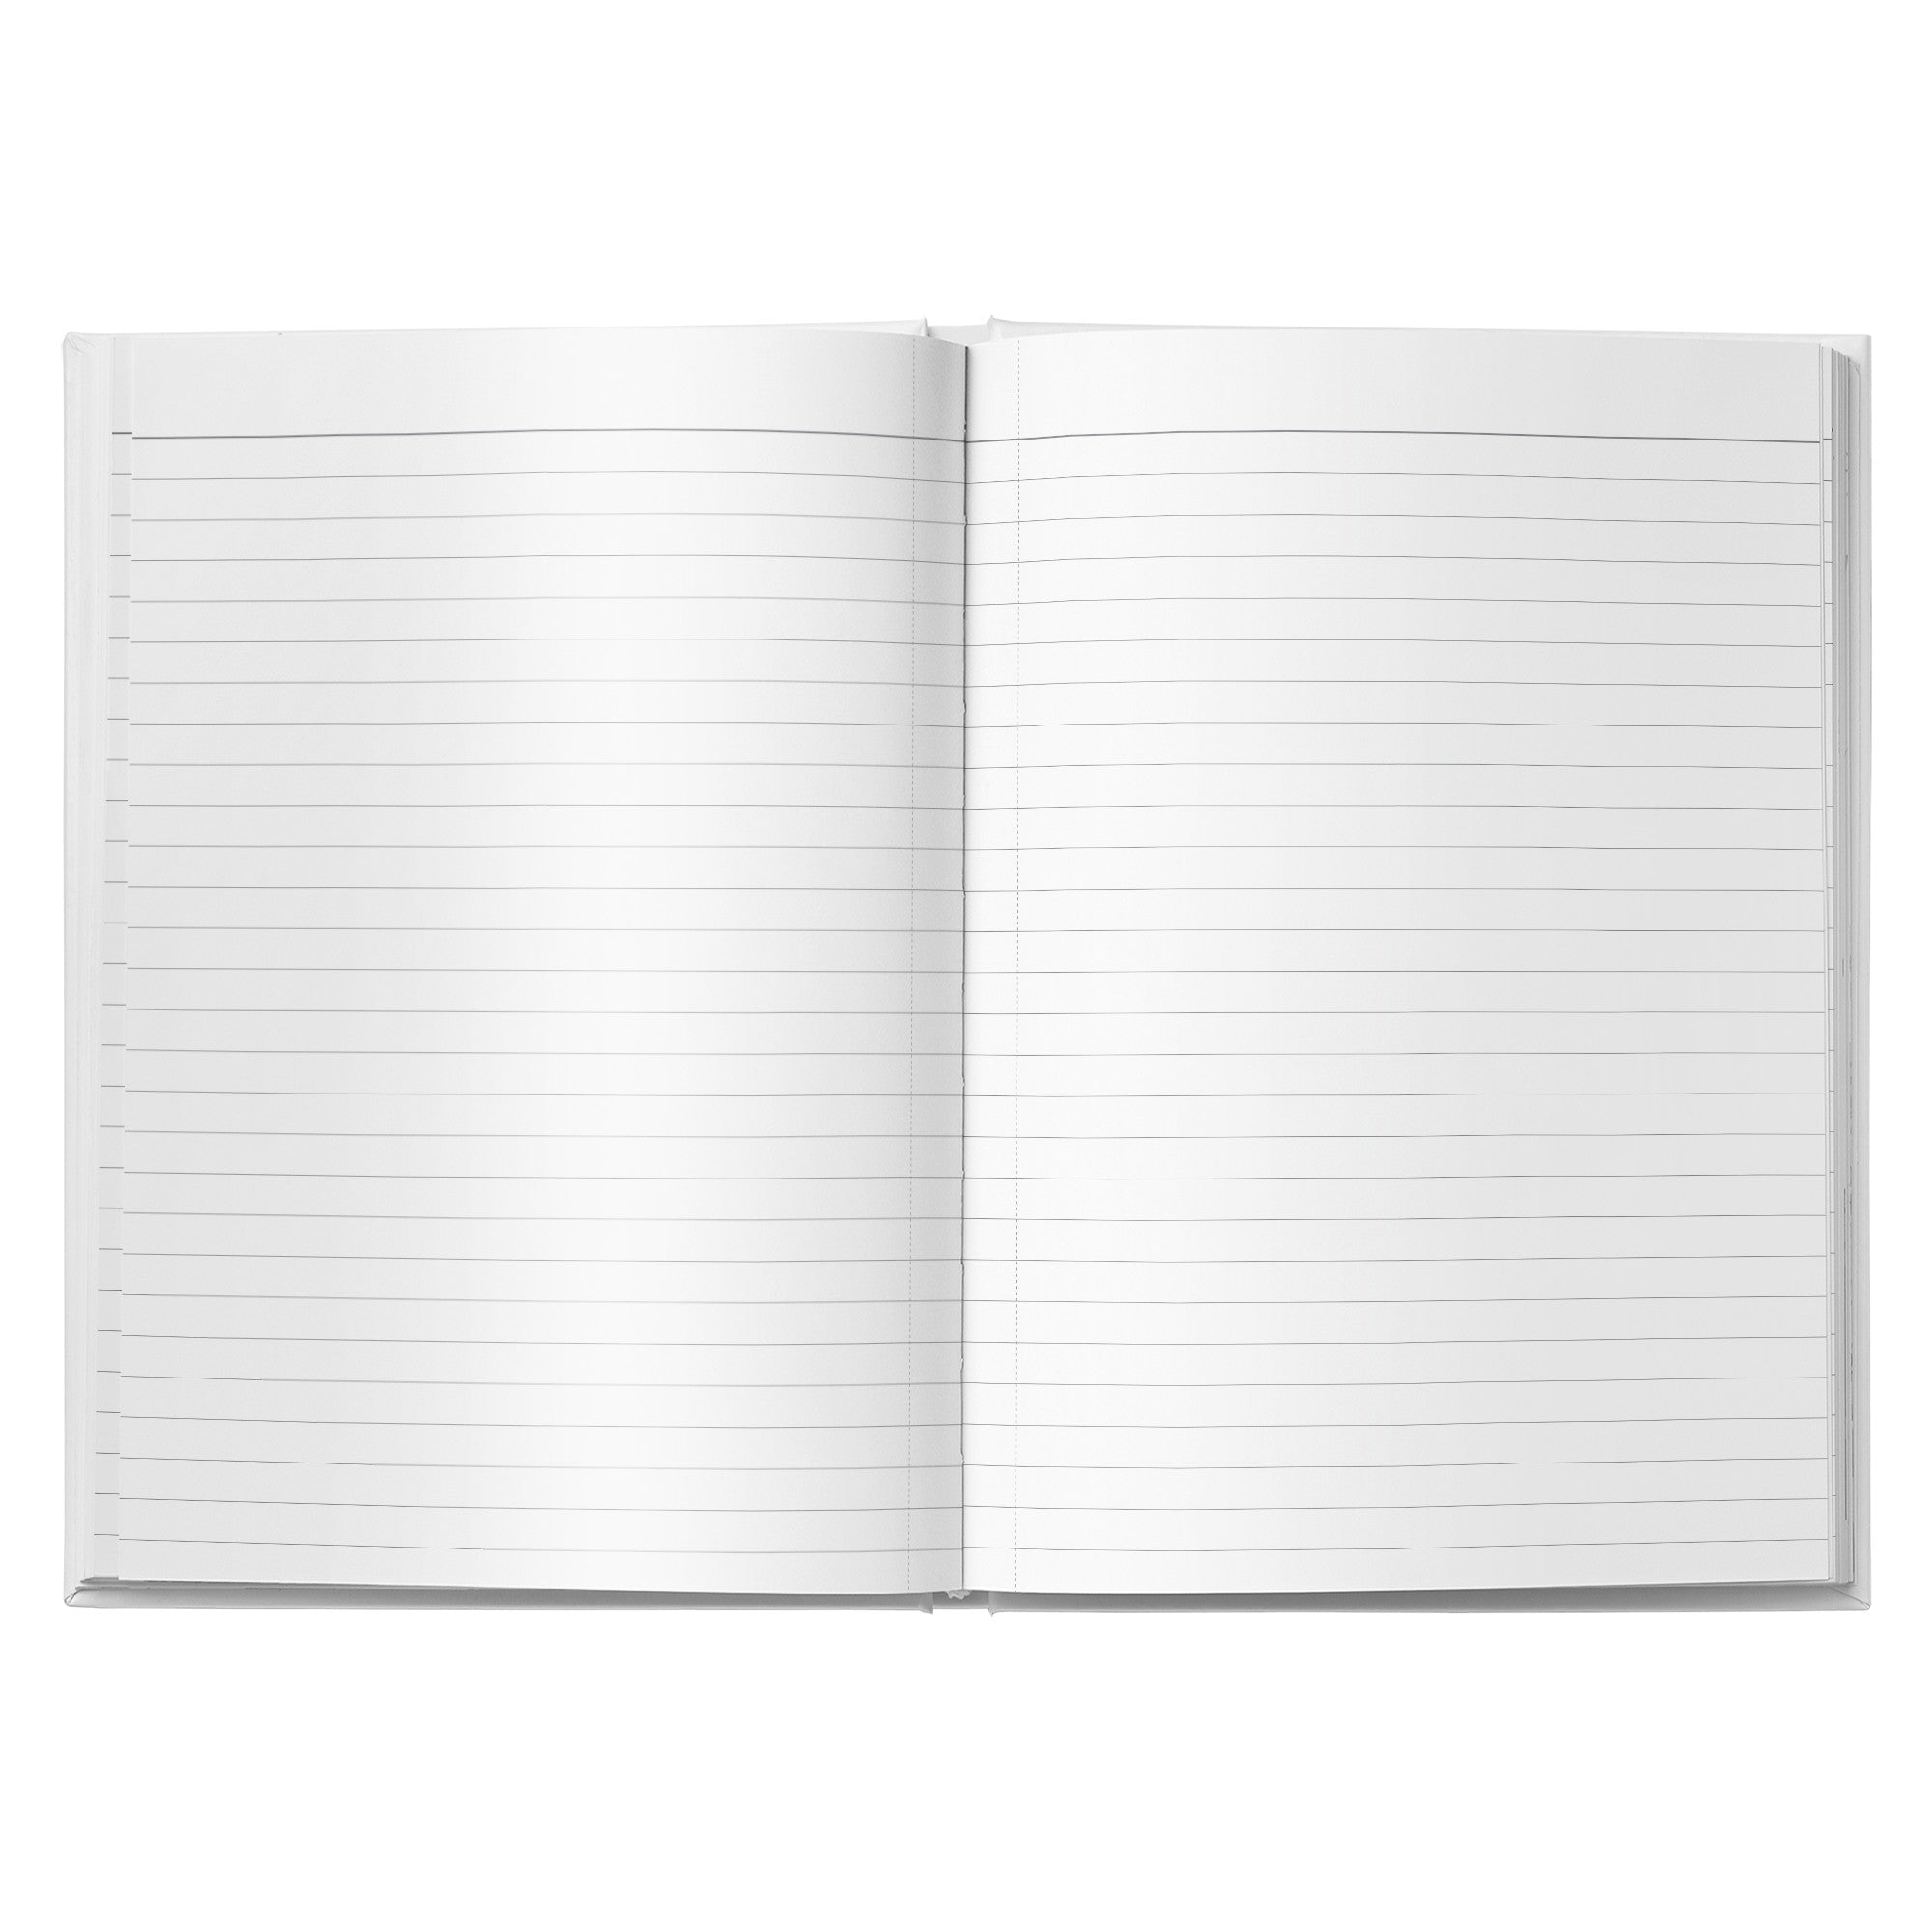 Open Whiskered Welcome Journal with visible spiral binding, lying flat on a white background.